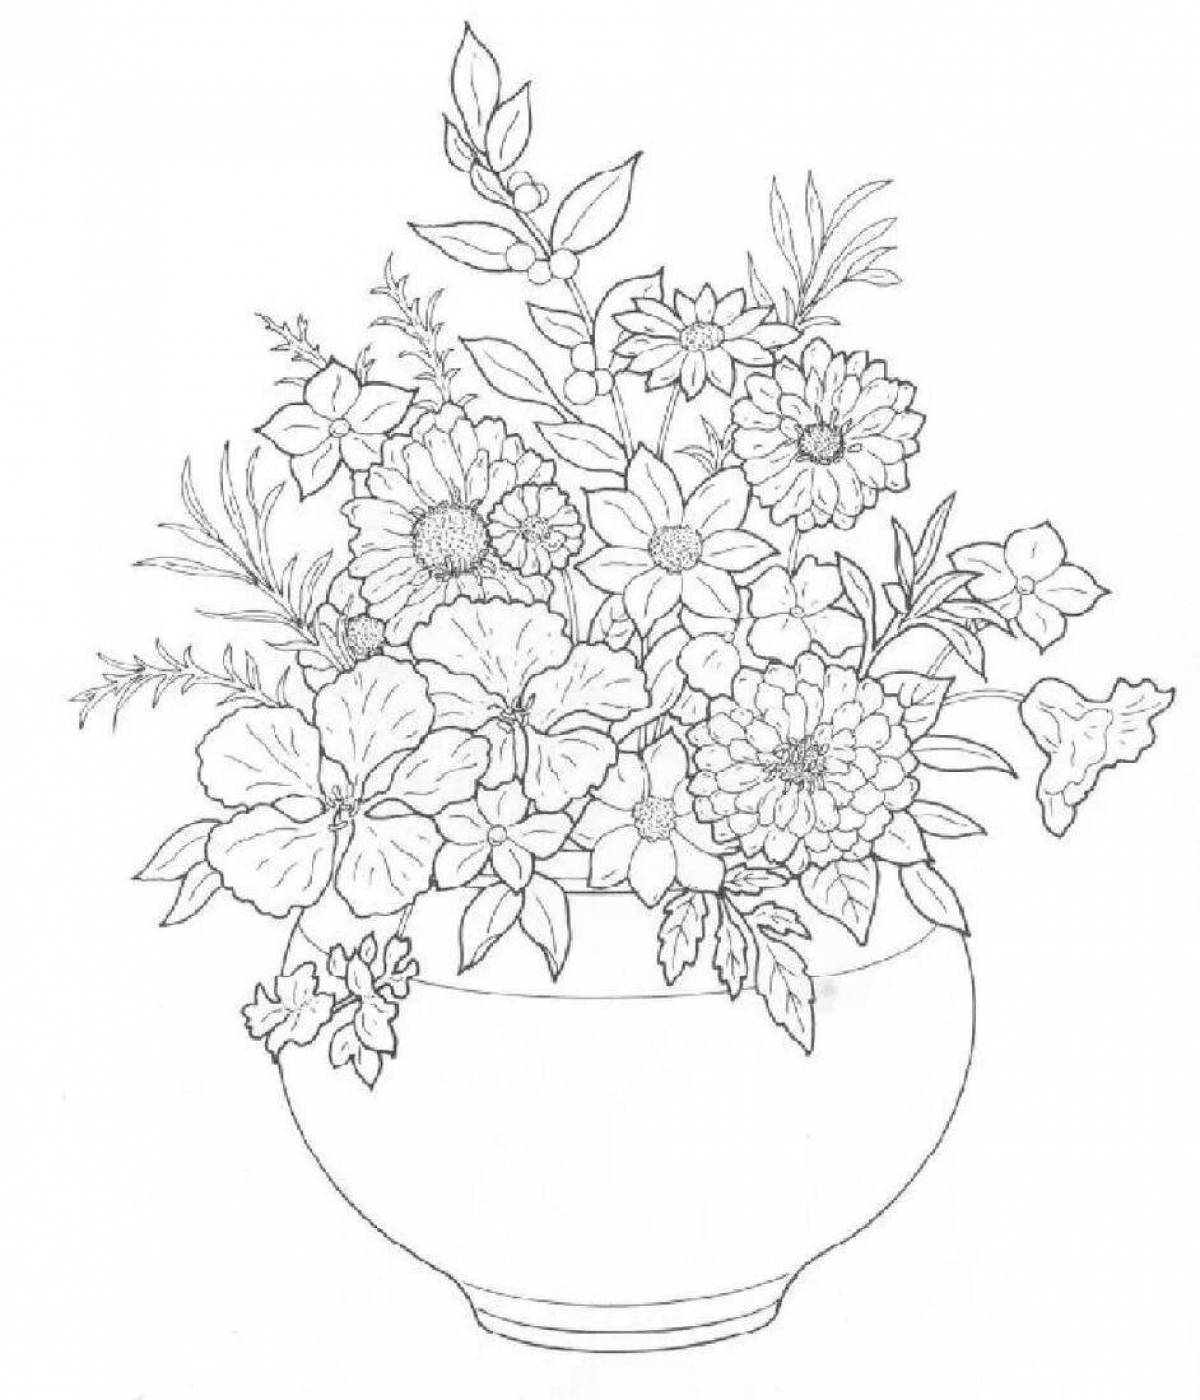 Shiny big flowers in a vase coloring book